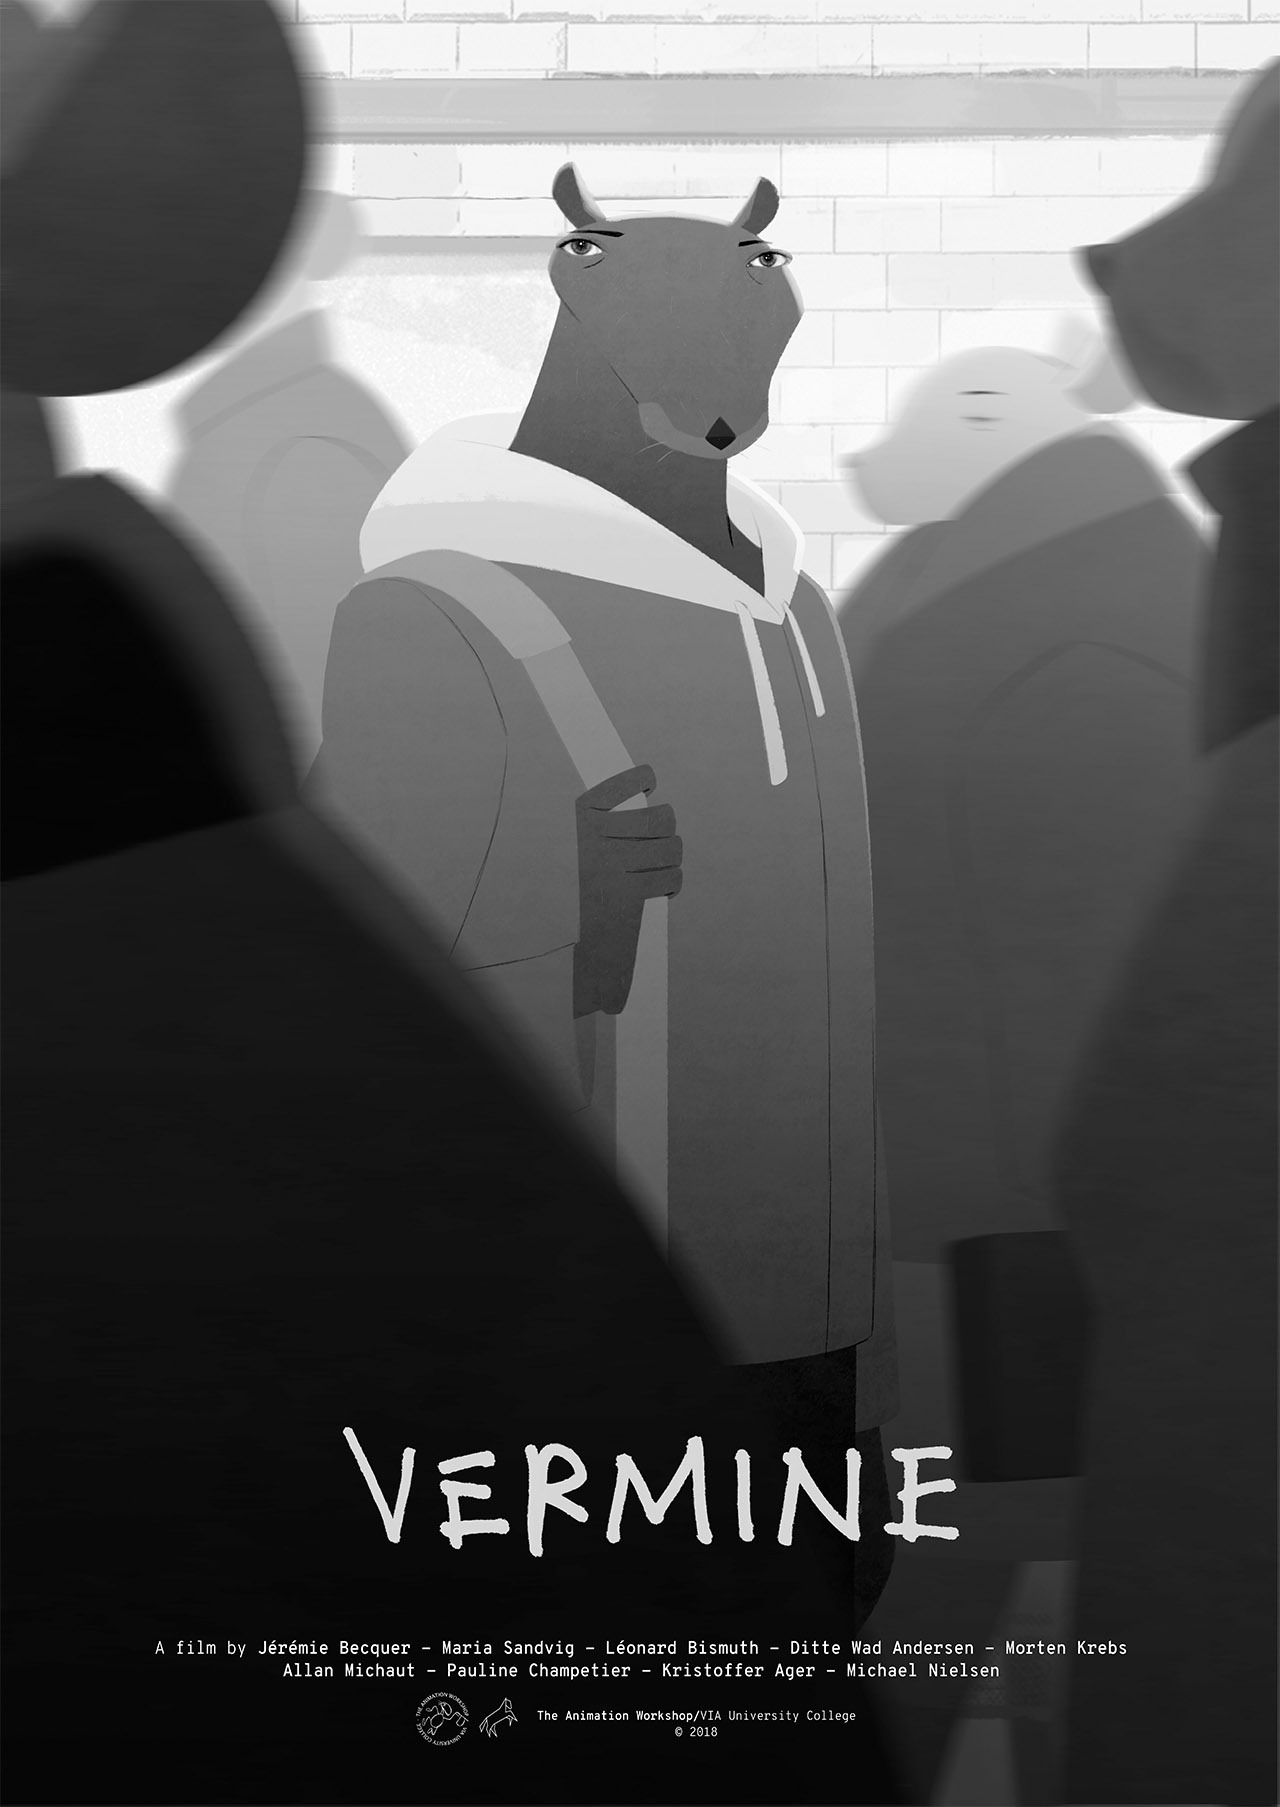 vermin-movie:
â€œThe movie is finished and now we wait.
Thank you to all the people supporting us and helping us throughout the past year! Stay tuned for further updates and release date in January 2018!
â€
Hey everyone, I forgot to reblog this, we...